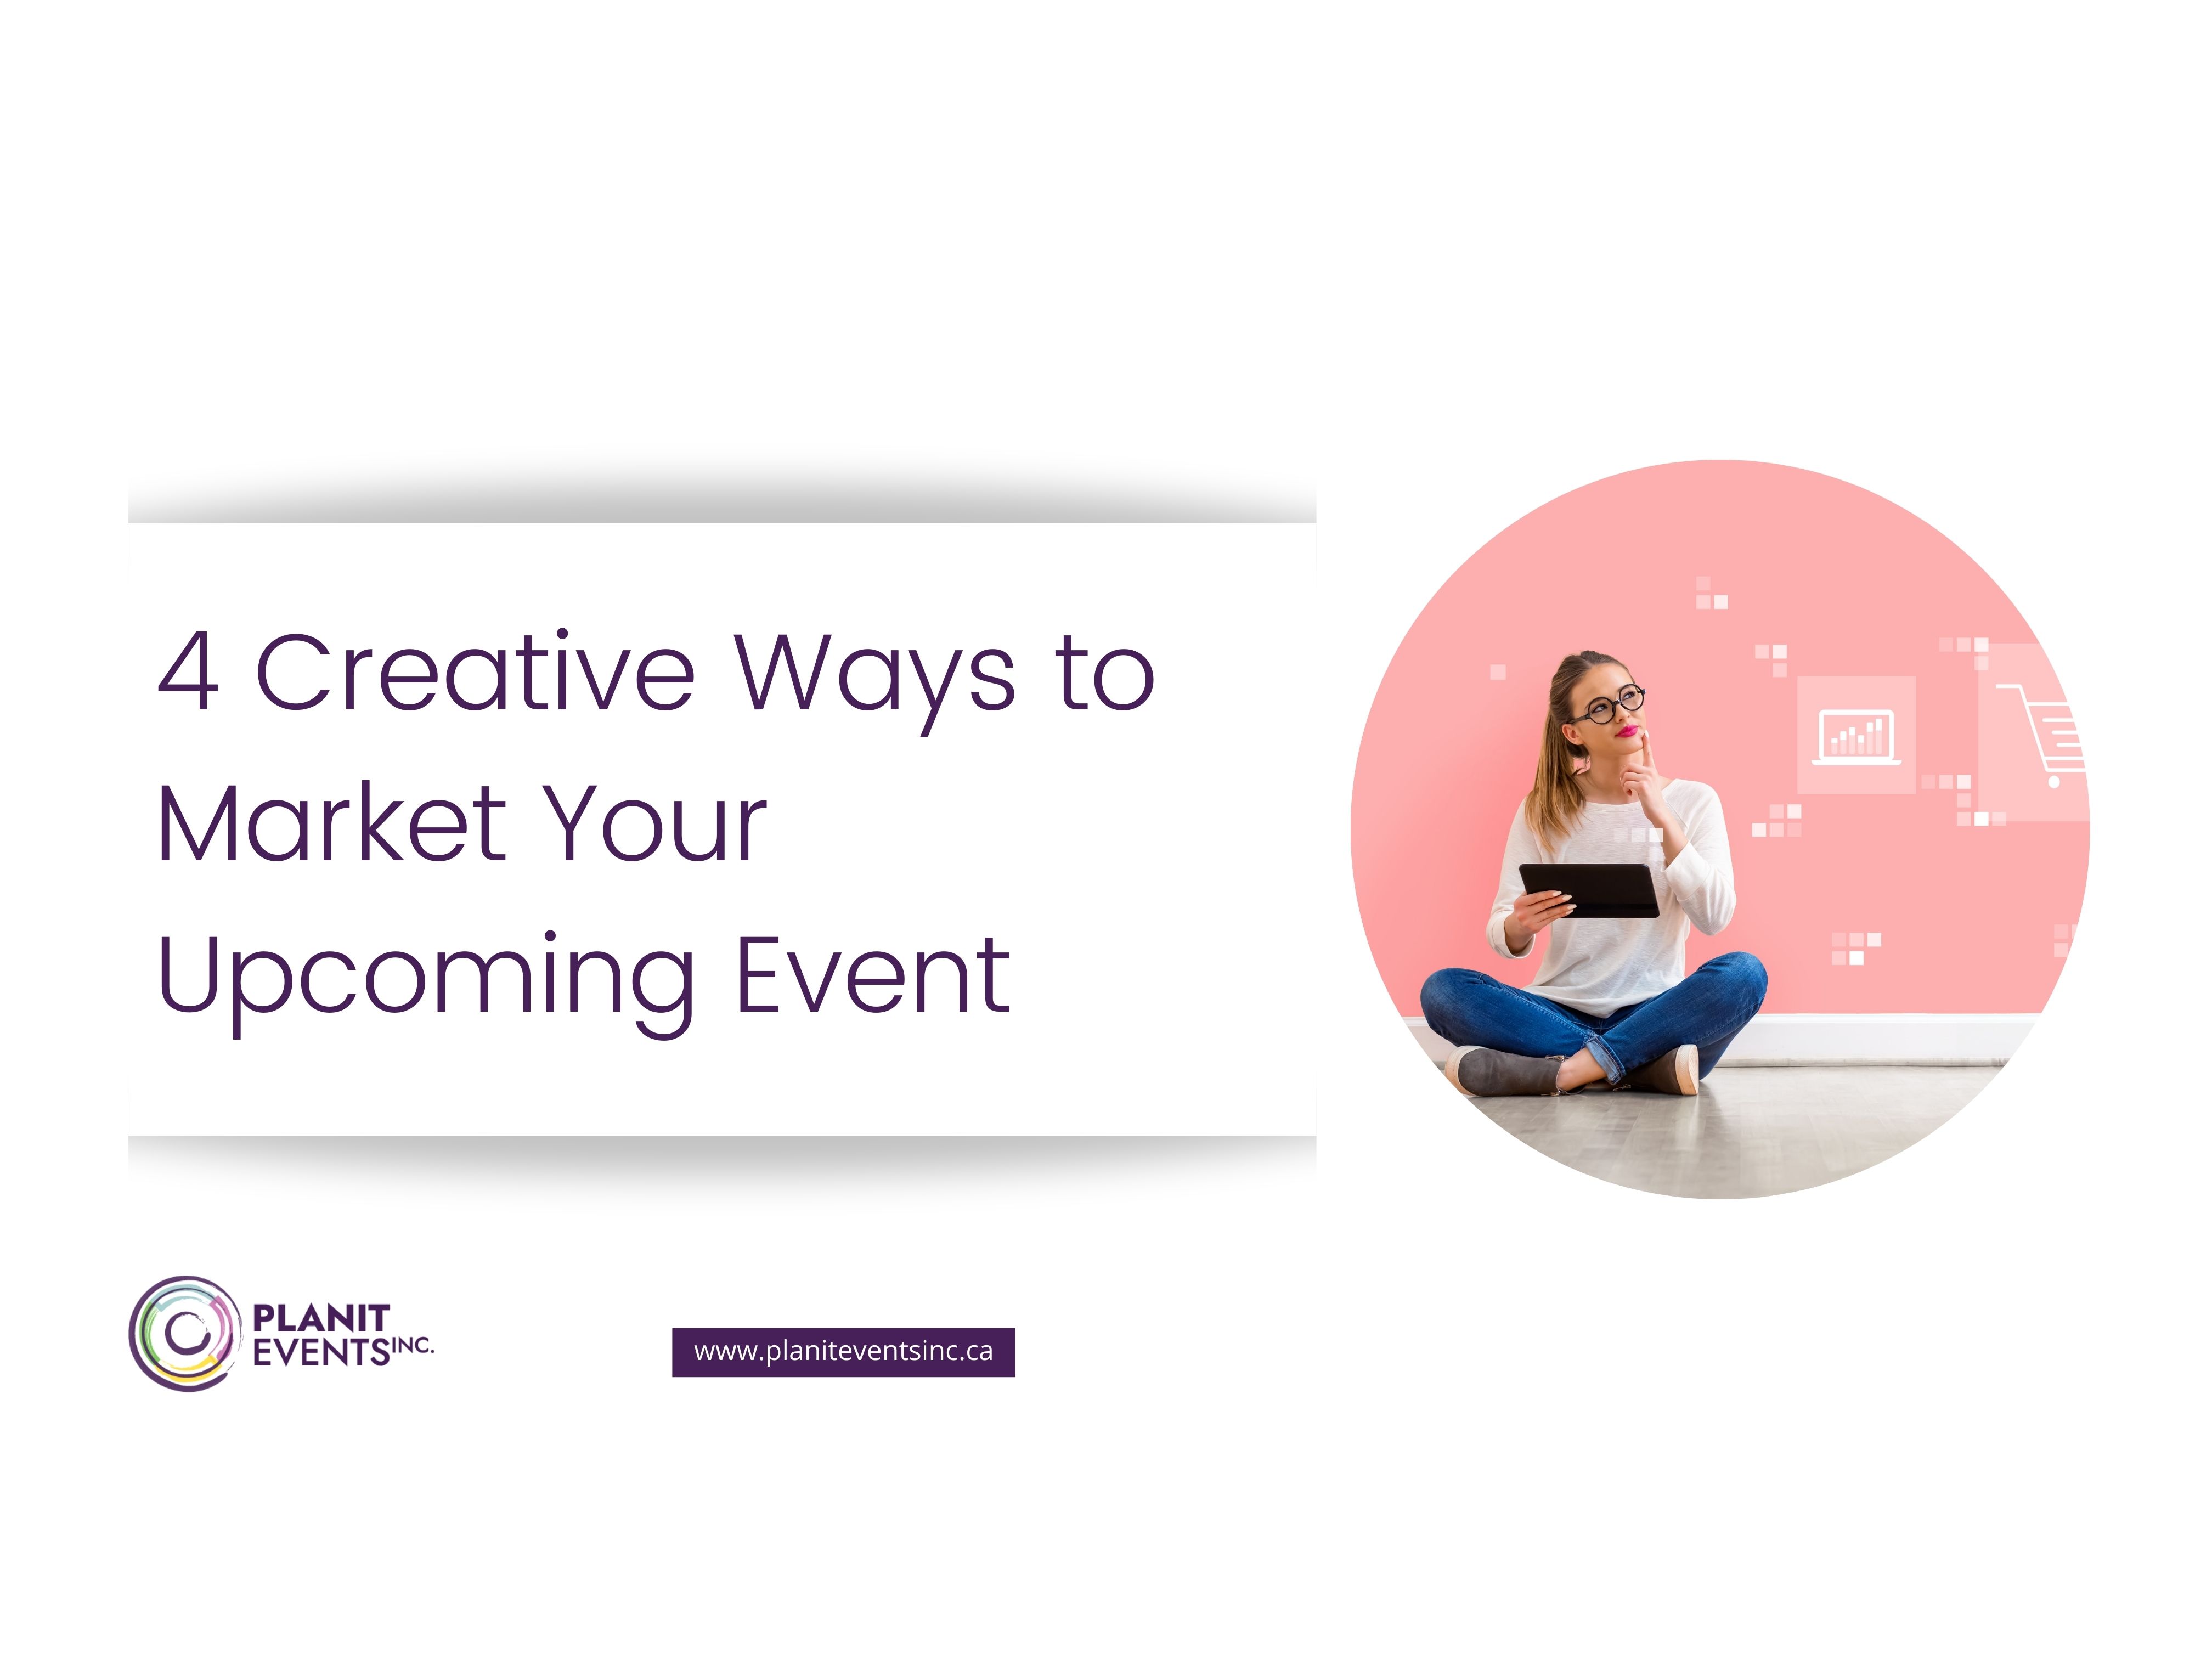 4 Creative Ways to Market Your Upcoming Event